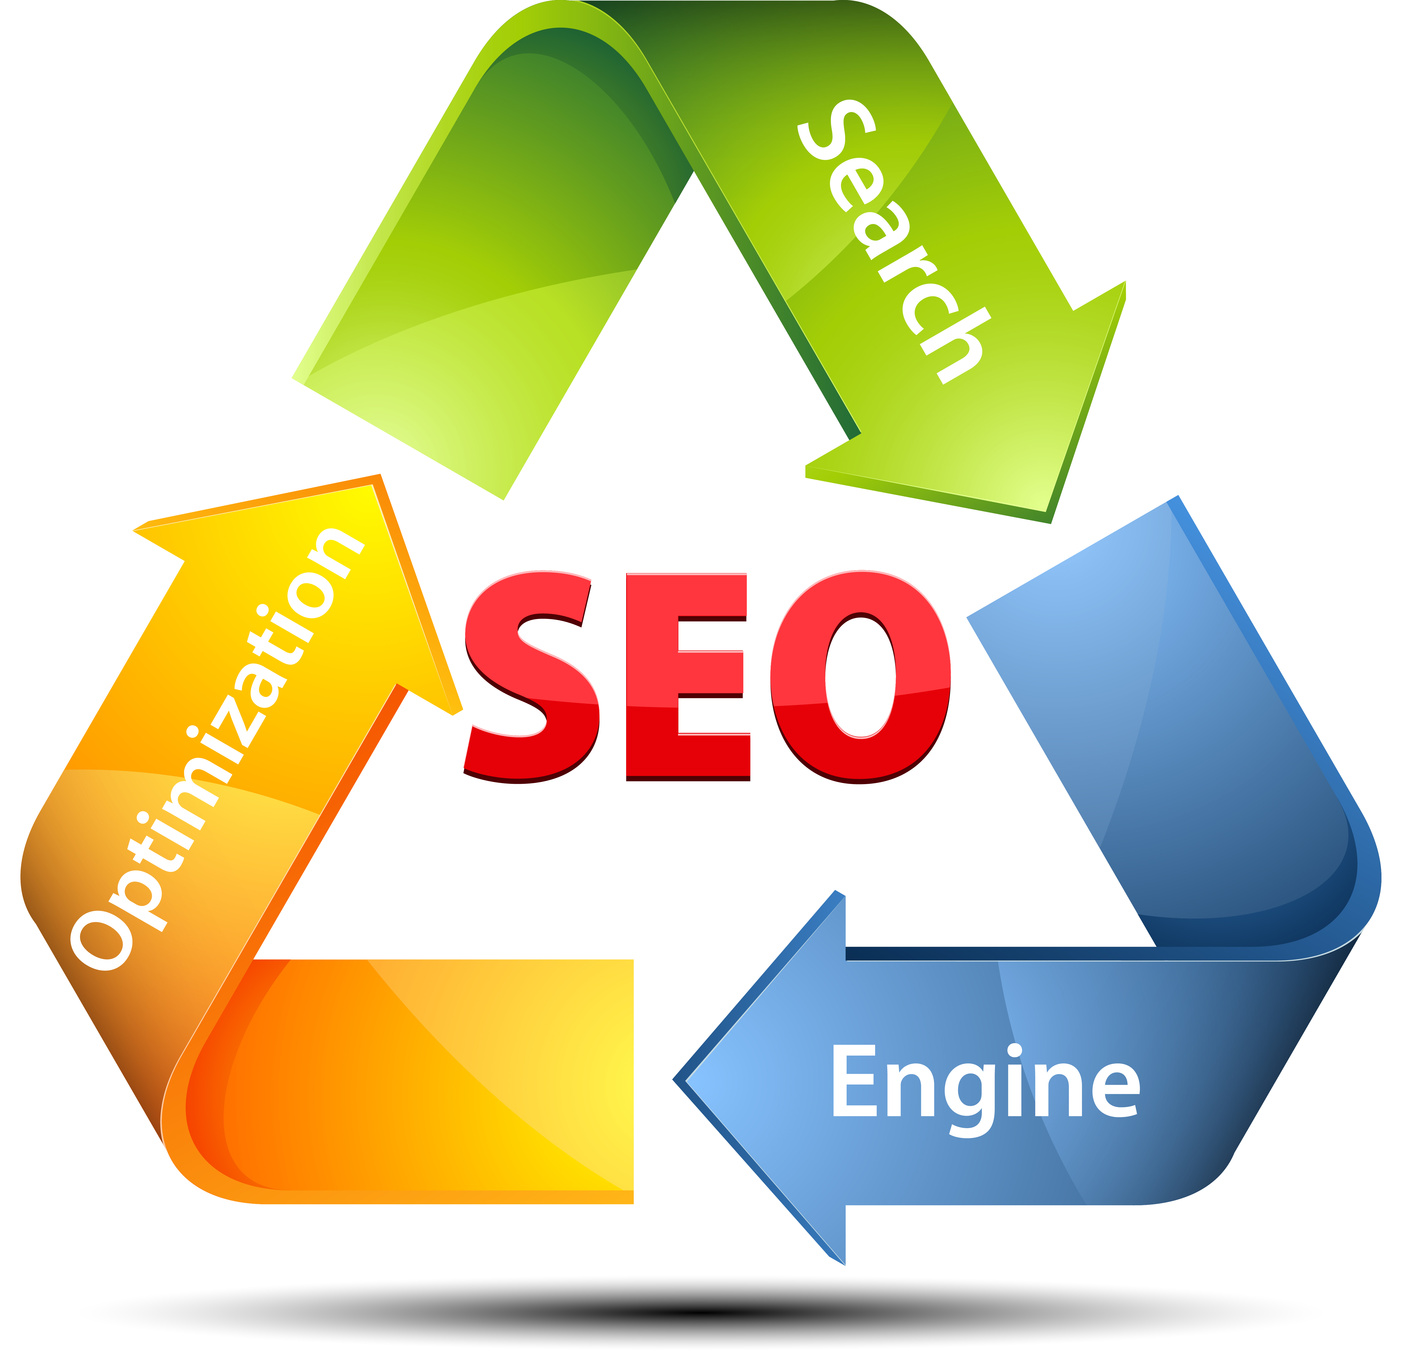 (SEO) Search Engine Optimization by professional marketer